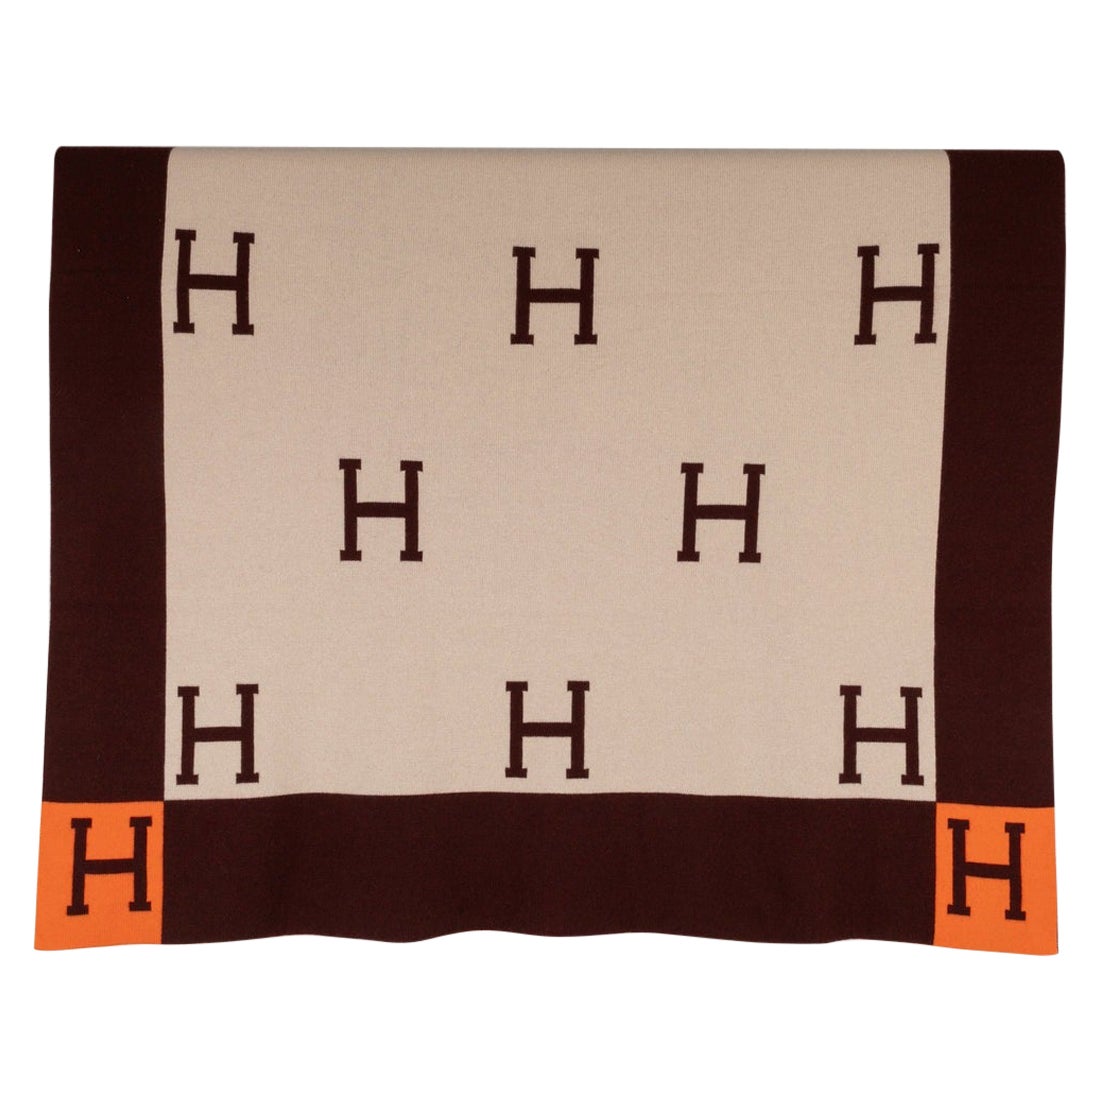 Hermès Cashmere and Wool Plaid/Blanket For Sale